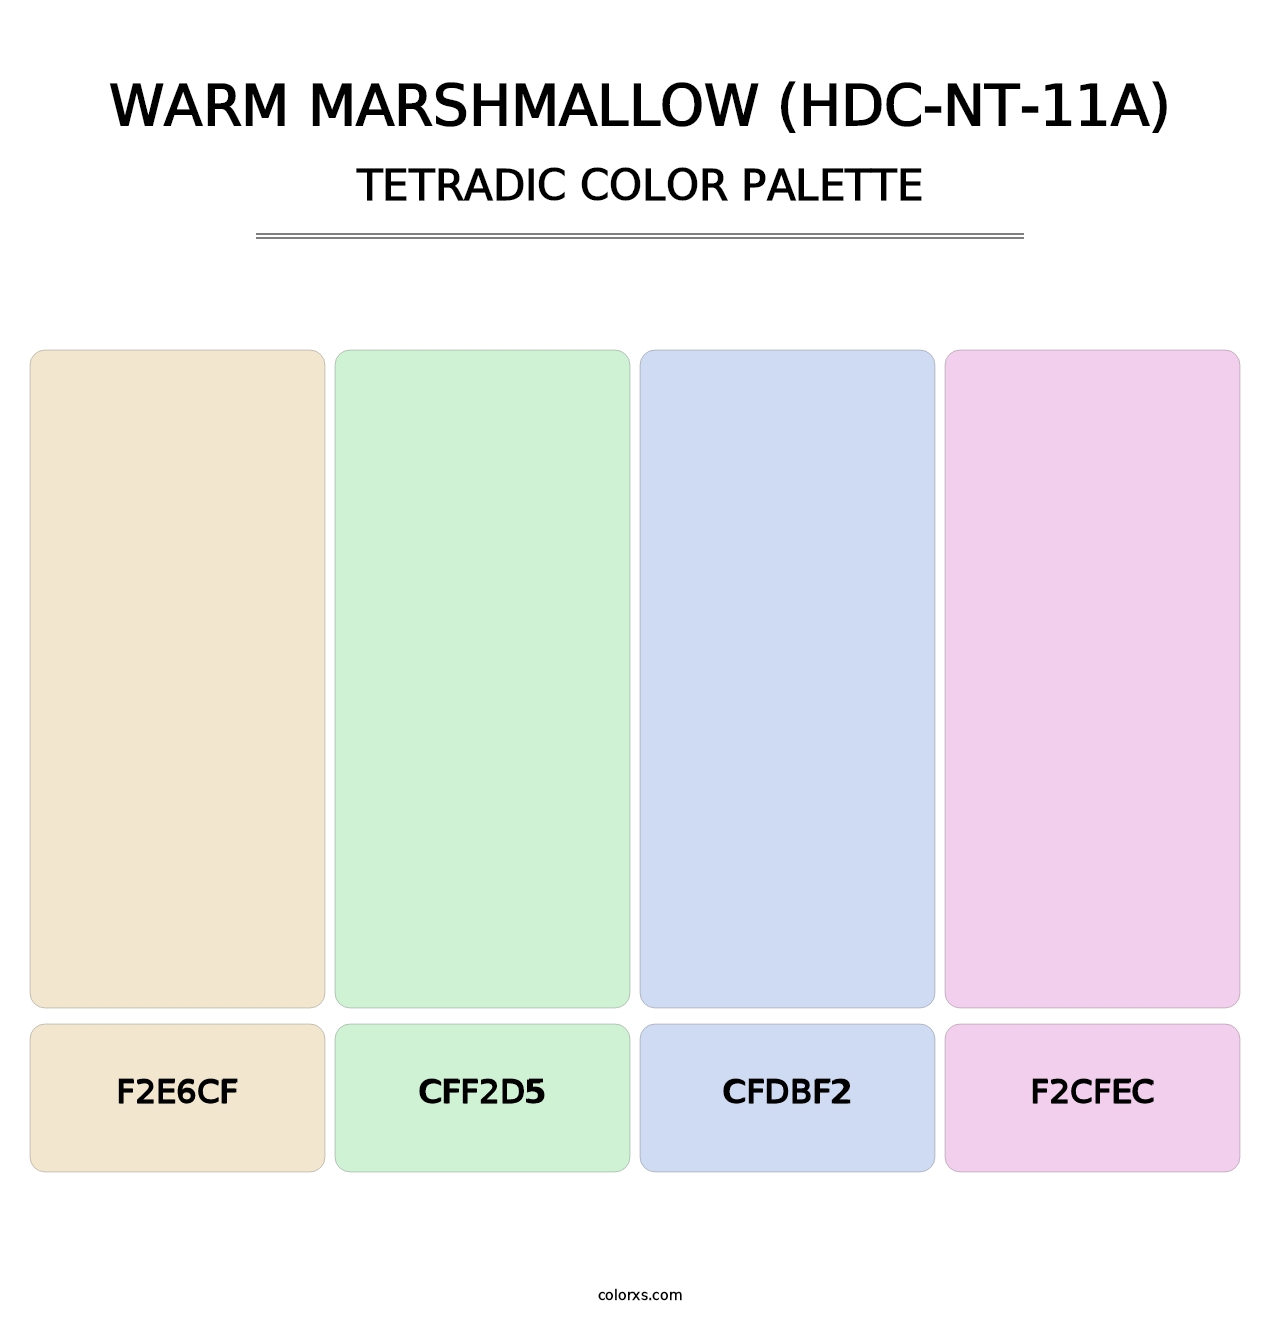 Warm Marshmallow (HDC-NT-11A) - Tetradic Color Palette